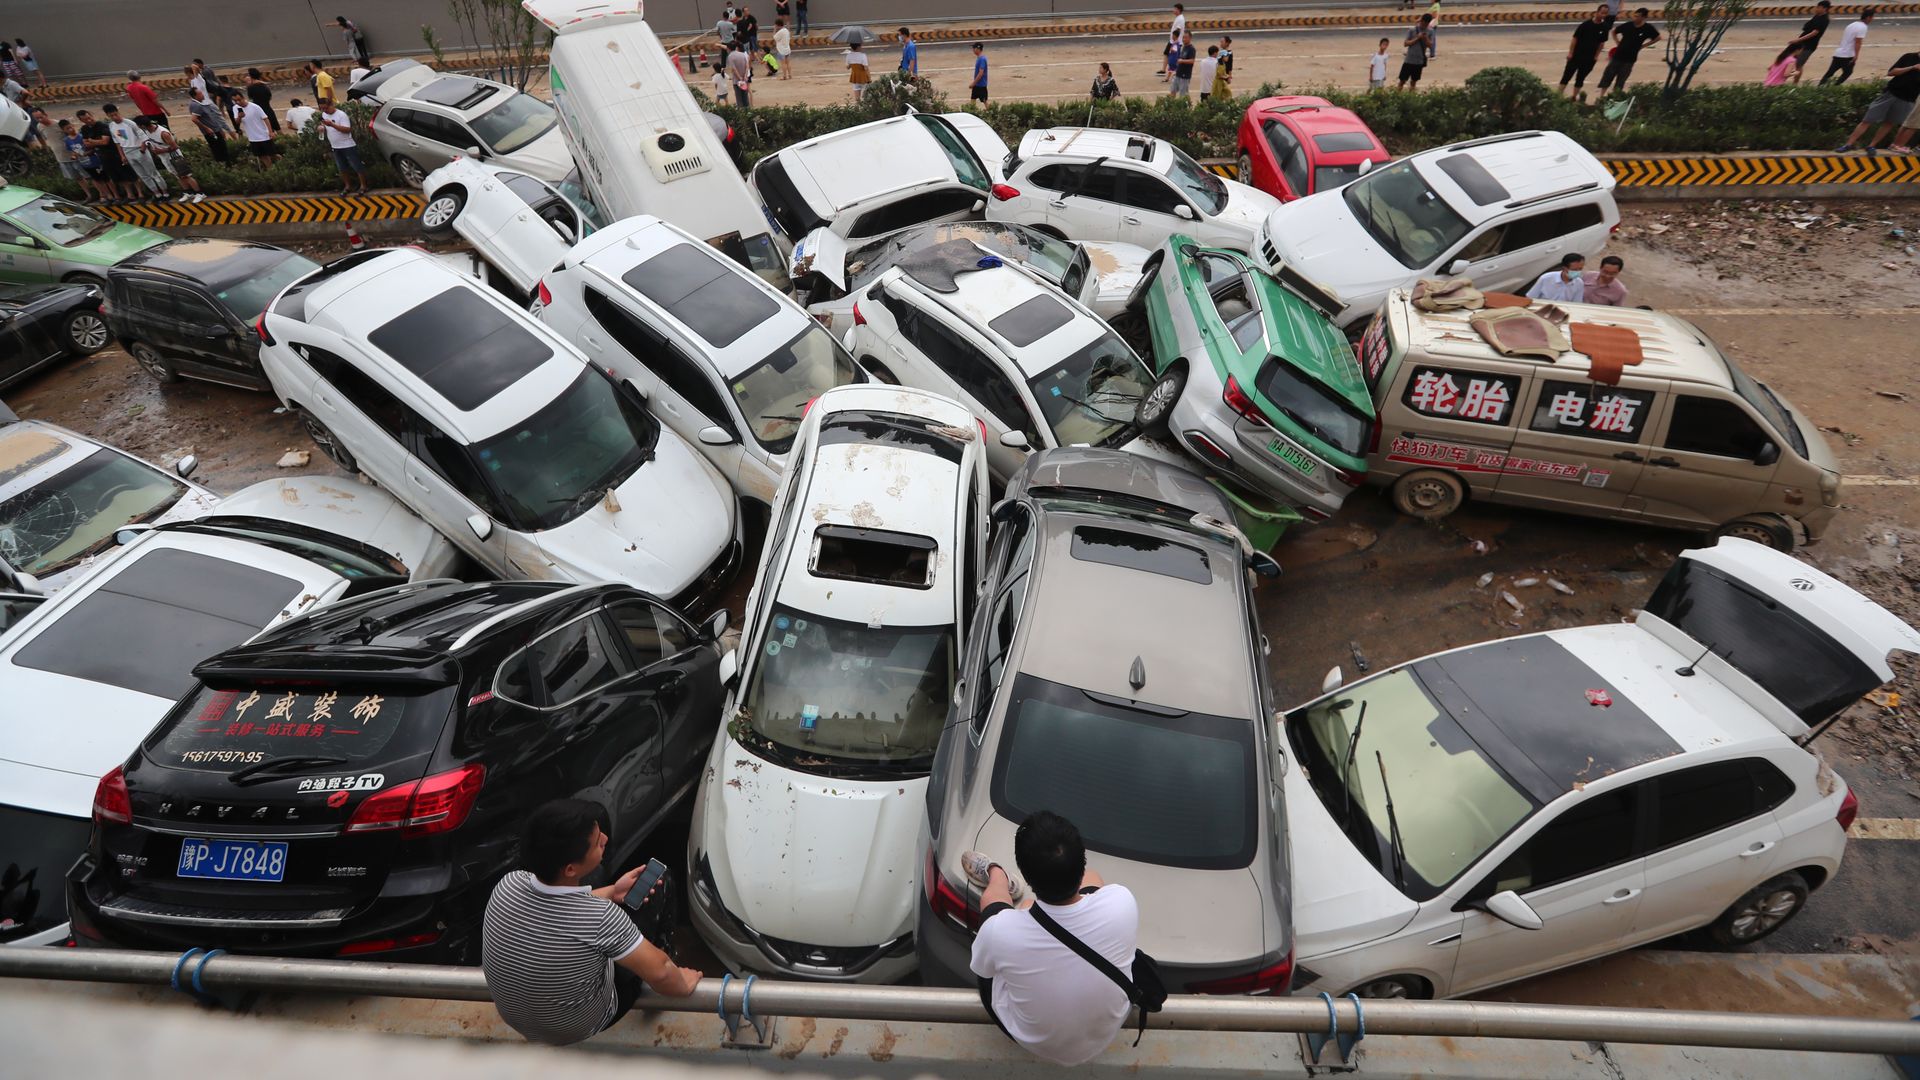 Damaged cars that were swept away by floodwaters piled on an expressway on July 22 in Zhengzhou, China.